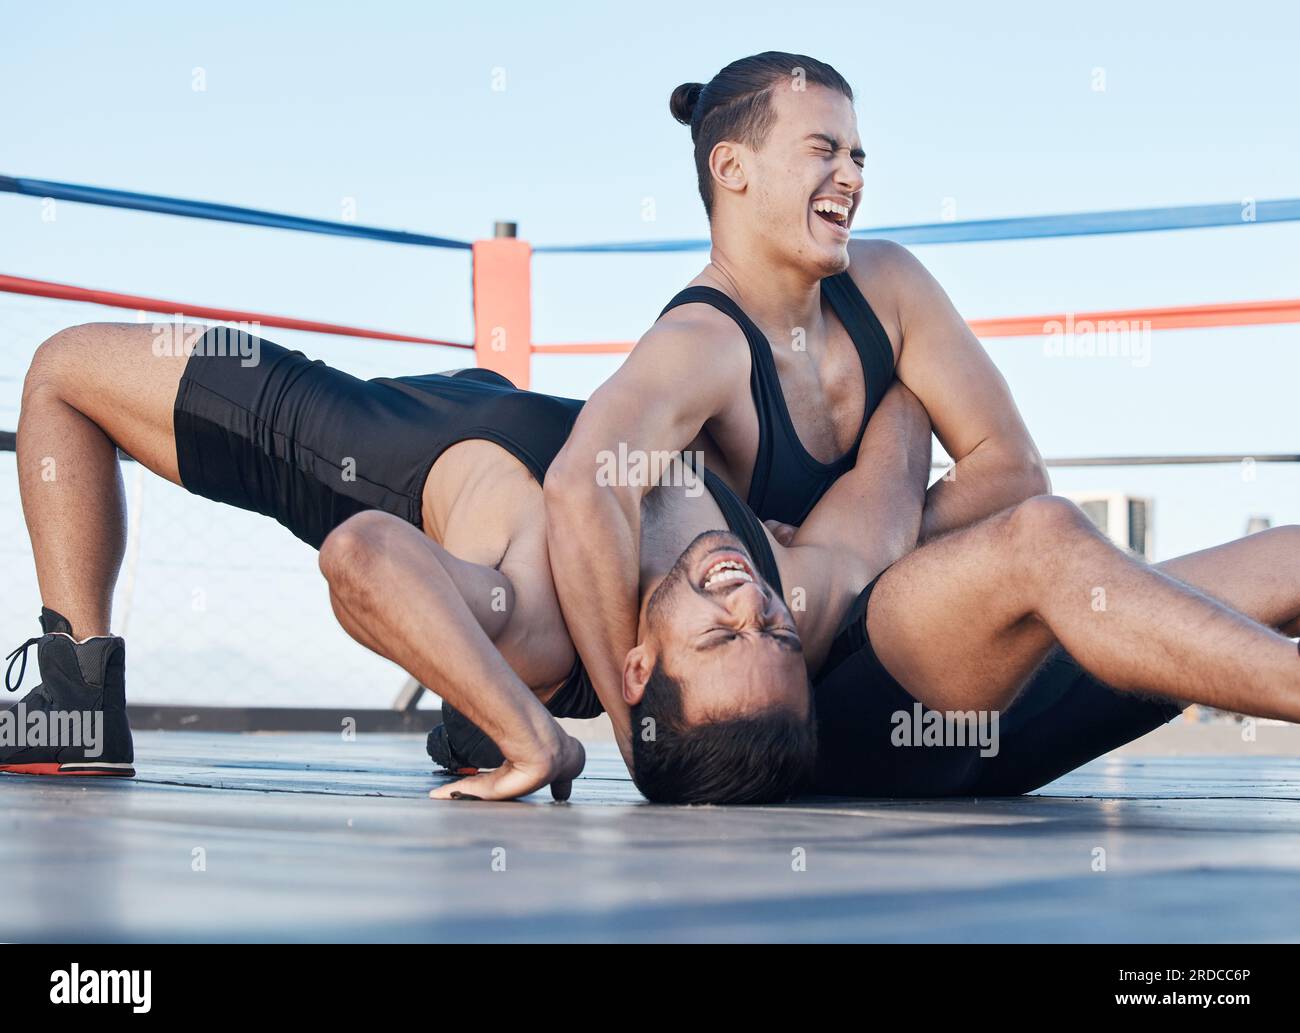 Men, wrestling and competition in a ring, mat or athlete winning in a tournament, match or training on floor of an arena. Fighting, match or Stock Photo